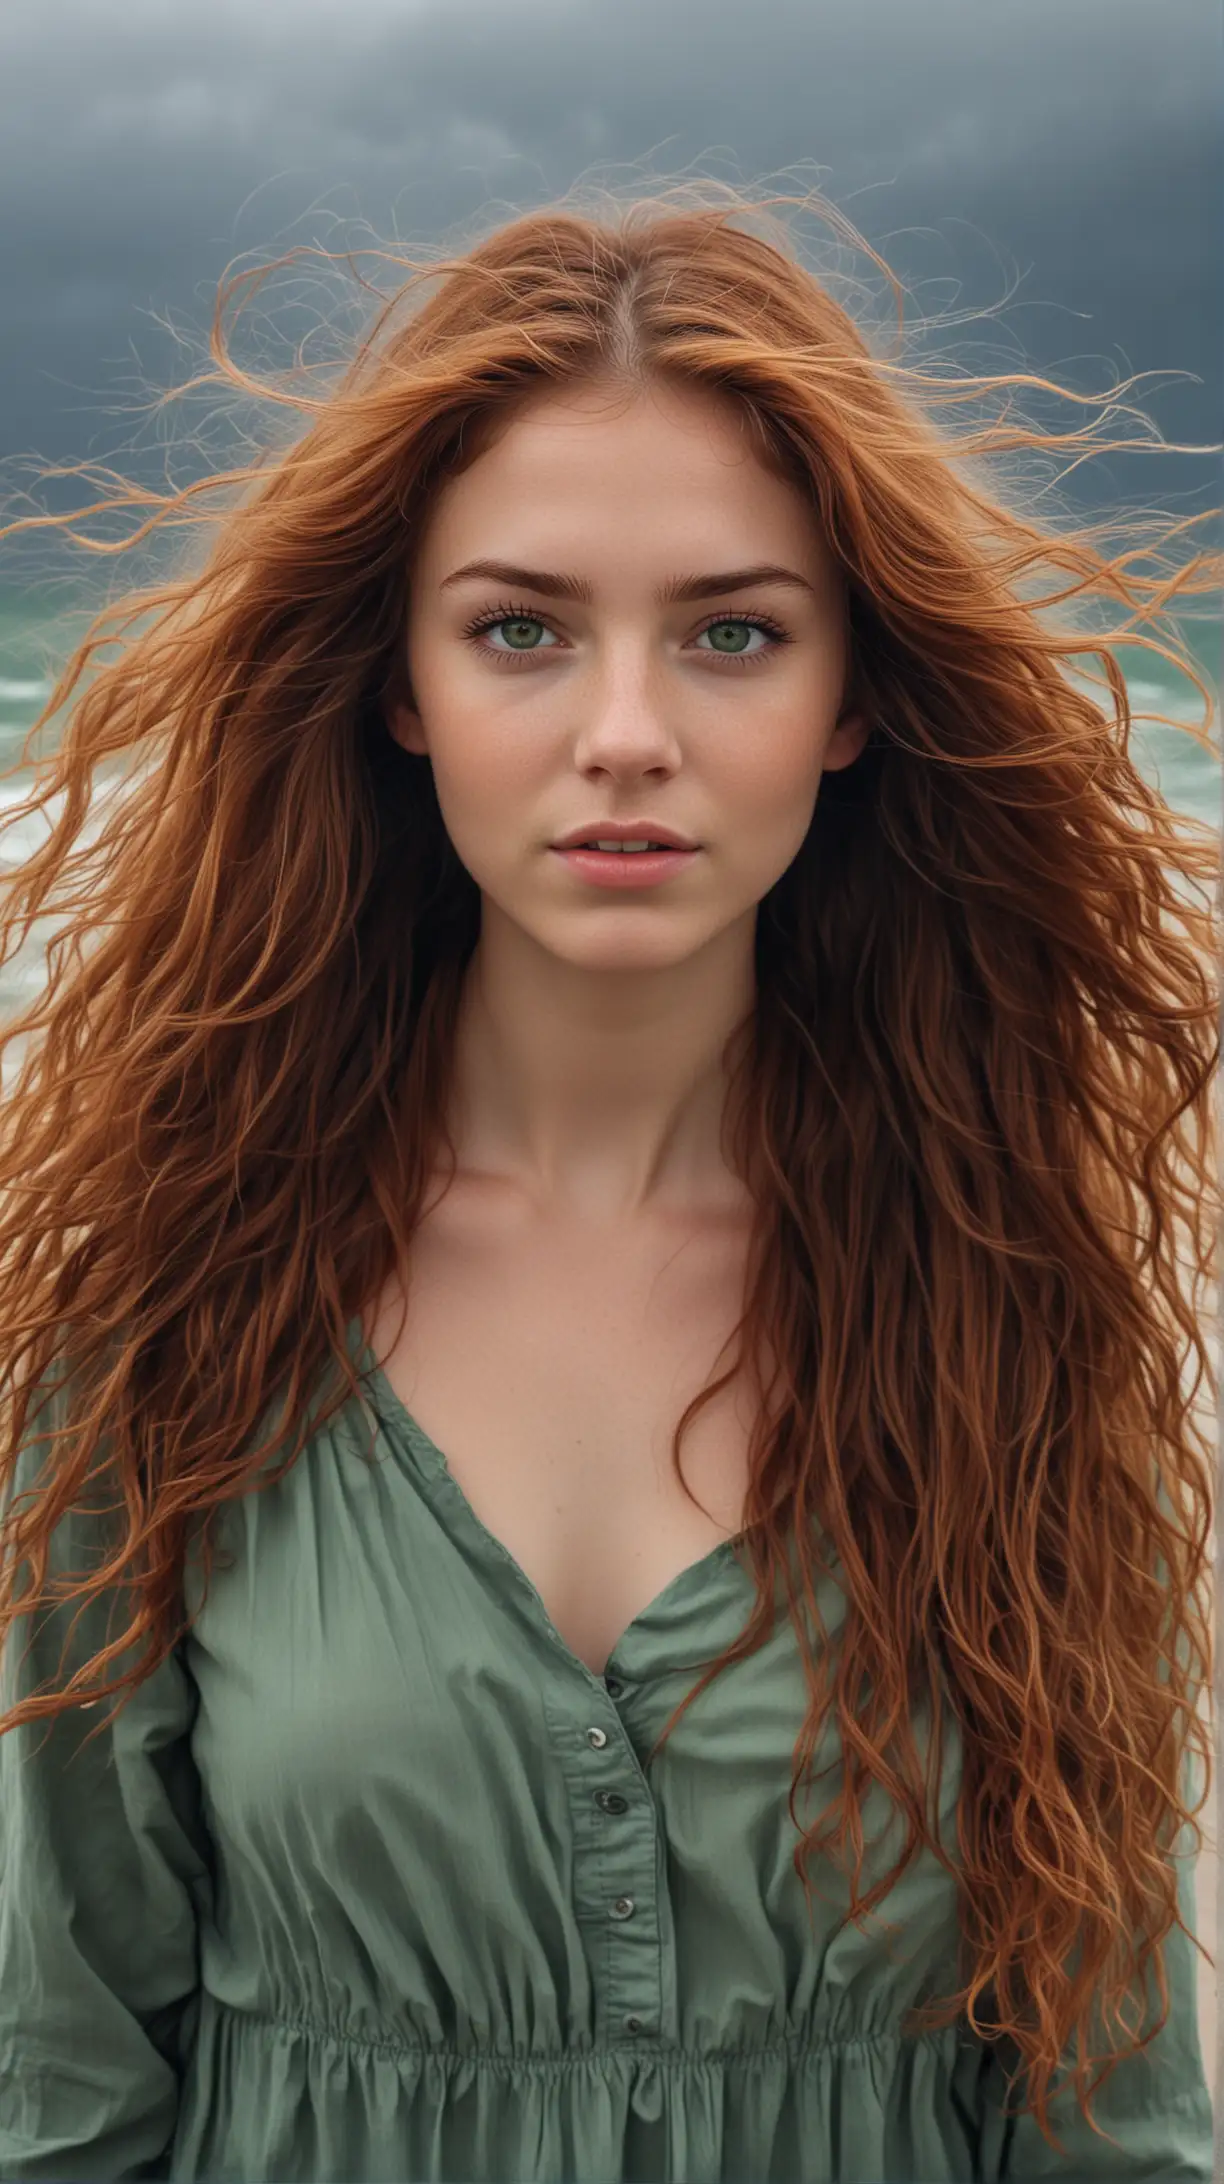 18-year-old Julie Roberts. She has long, wavy auburn hair, and intense green eyes. She is standing in a storm with the wind blowing her hair. Her palms are outstretched. 